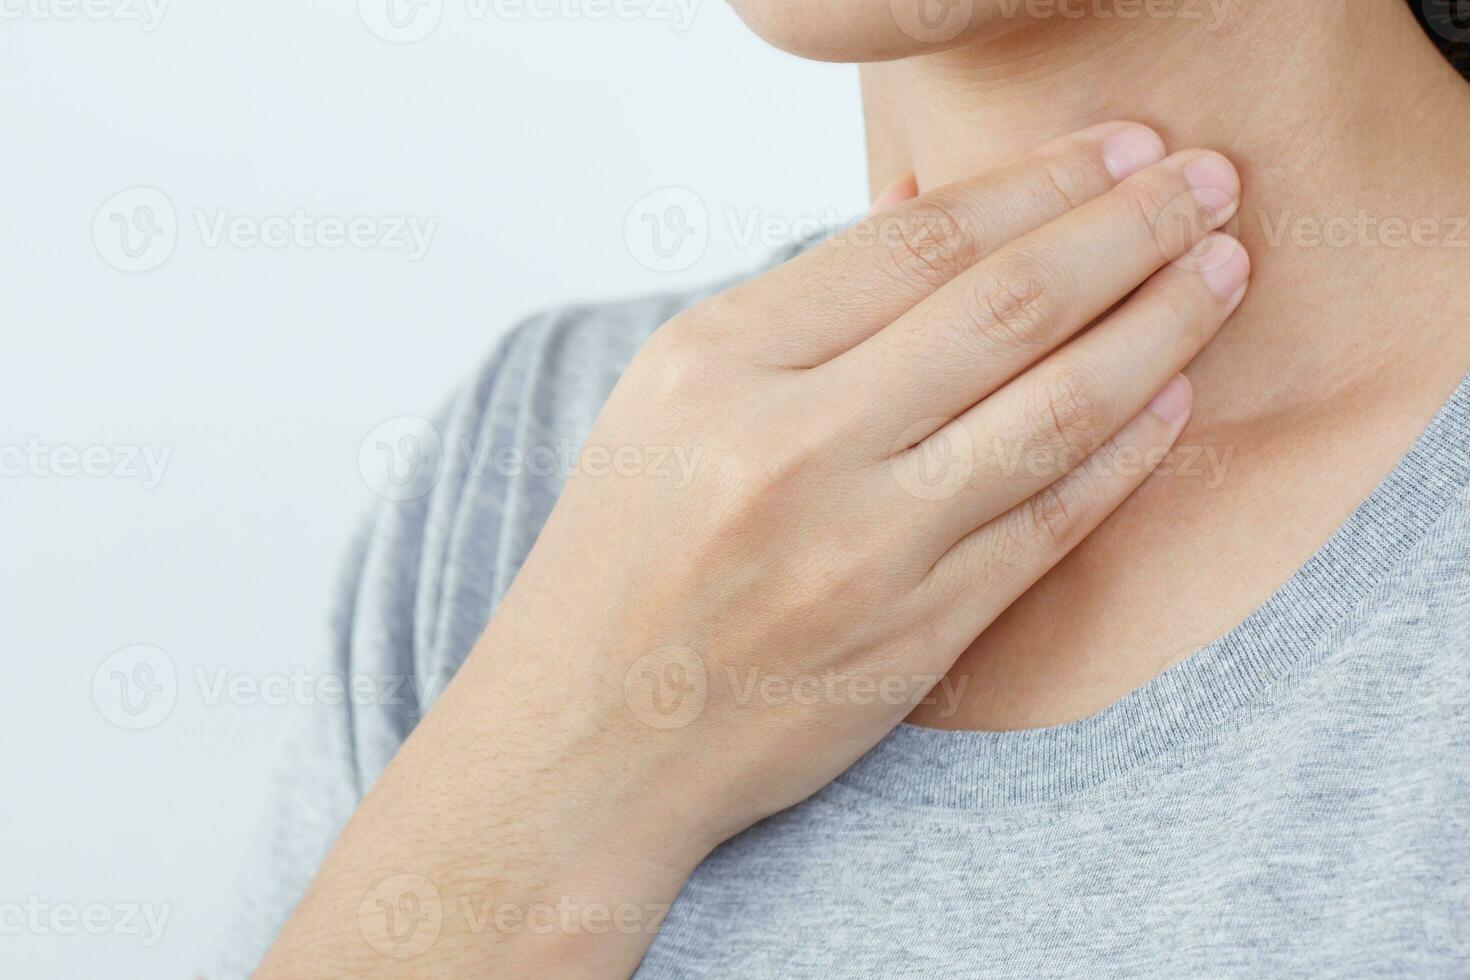 sore throat pain. Closeup of young woman sick holding her inflamed throat using hands to touch the ill neck in blue shirt on gray background. Medical and healthcare concept. Focus red on to show pain photo